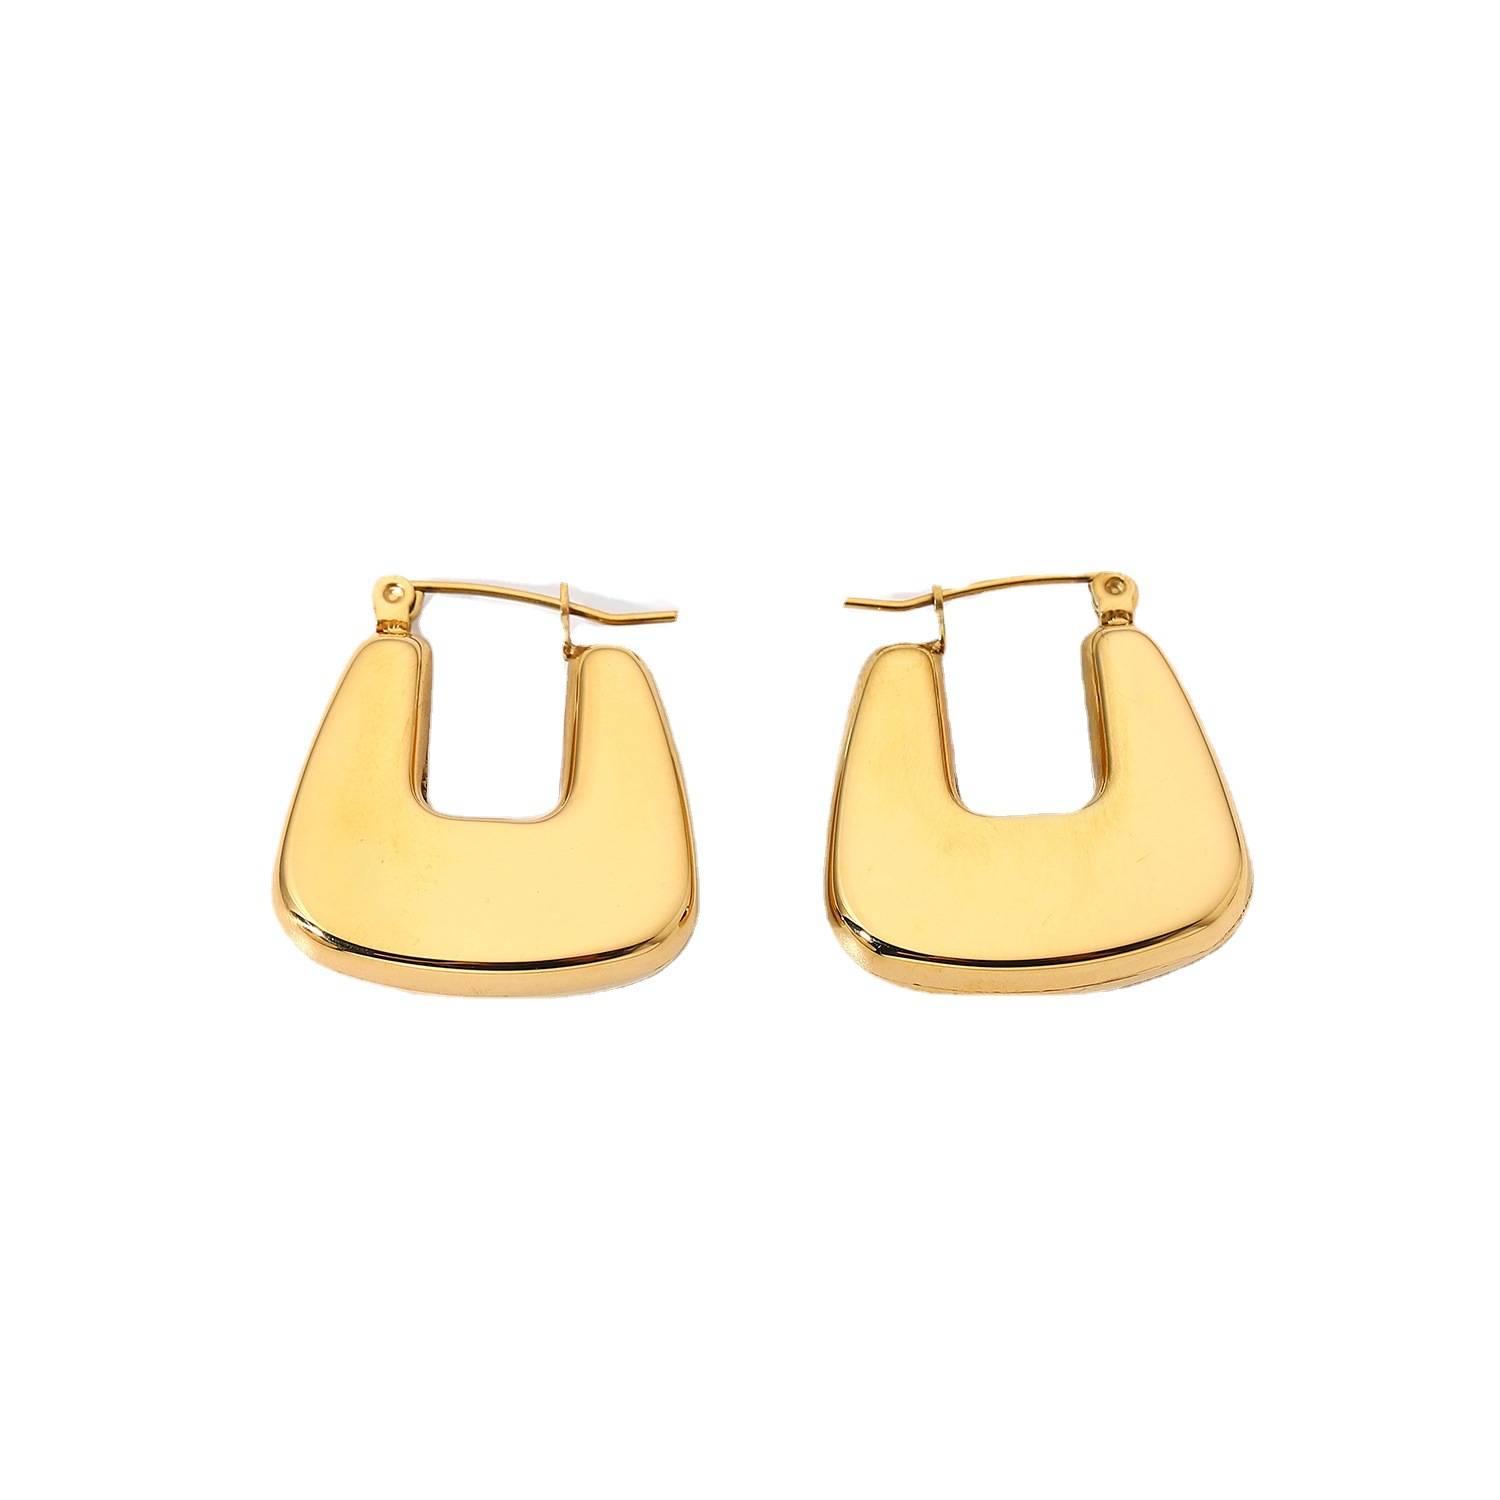 High Quality Retro Geometric U Shaped Earrings 18K Gold Plated Stainless Steel Jewelry Statement Chunky Hoop Earrings For Women